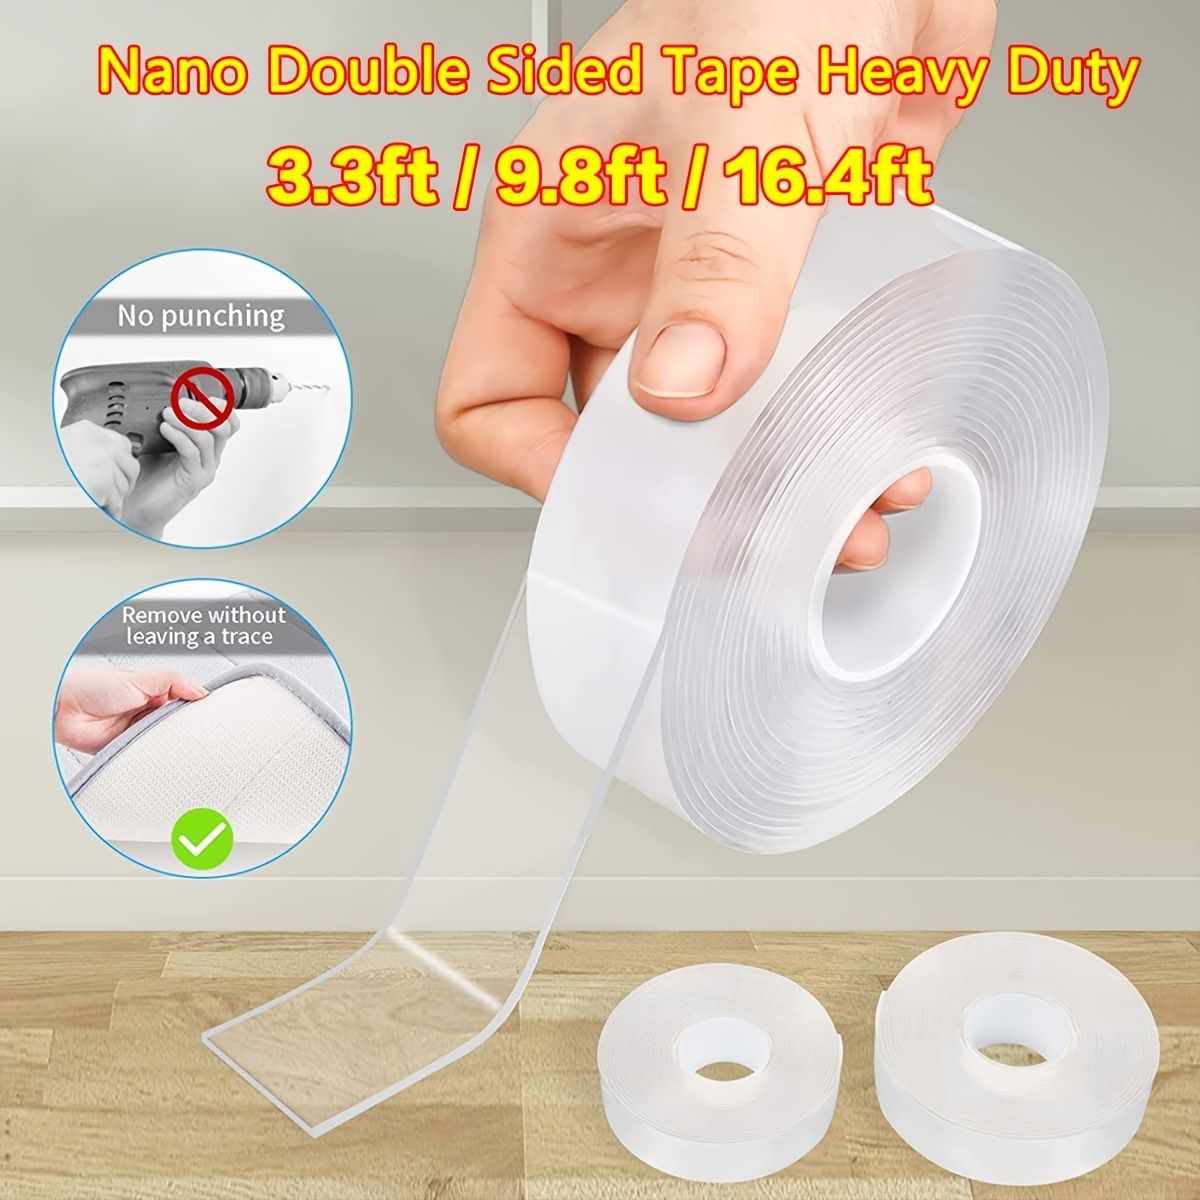 1pc nano double sided tape heavy duty multipurpose removable transparent poster tape adhesive strips strong sticky mounting hanging strips gel tape for home and office 3 3ft 9 8ft 16 4ft 0